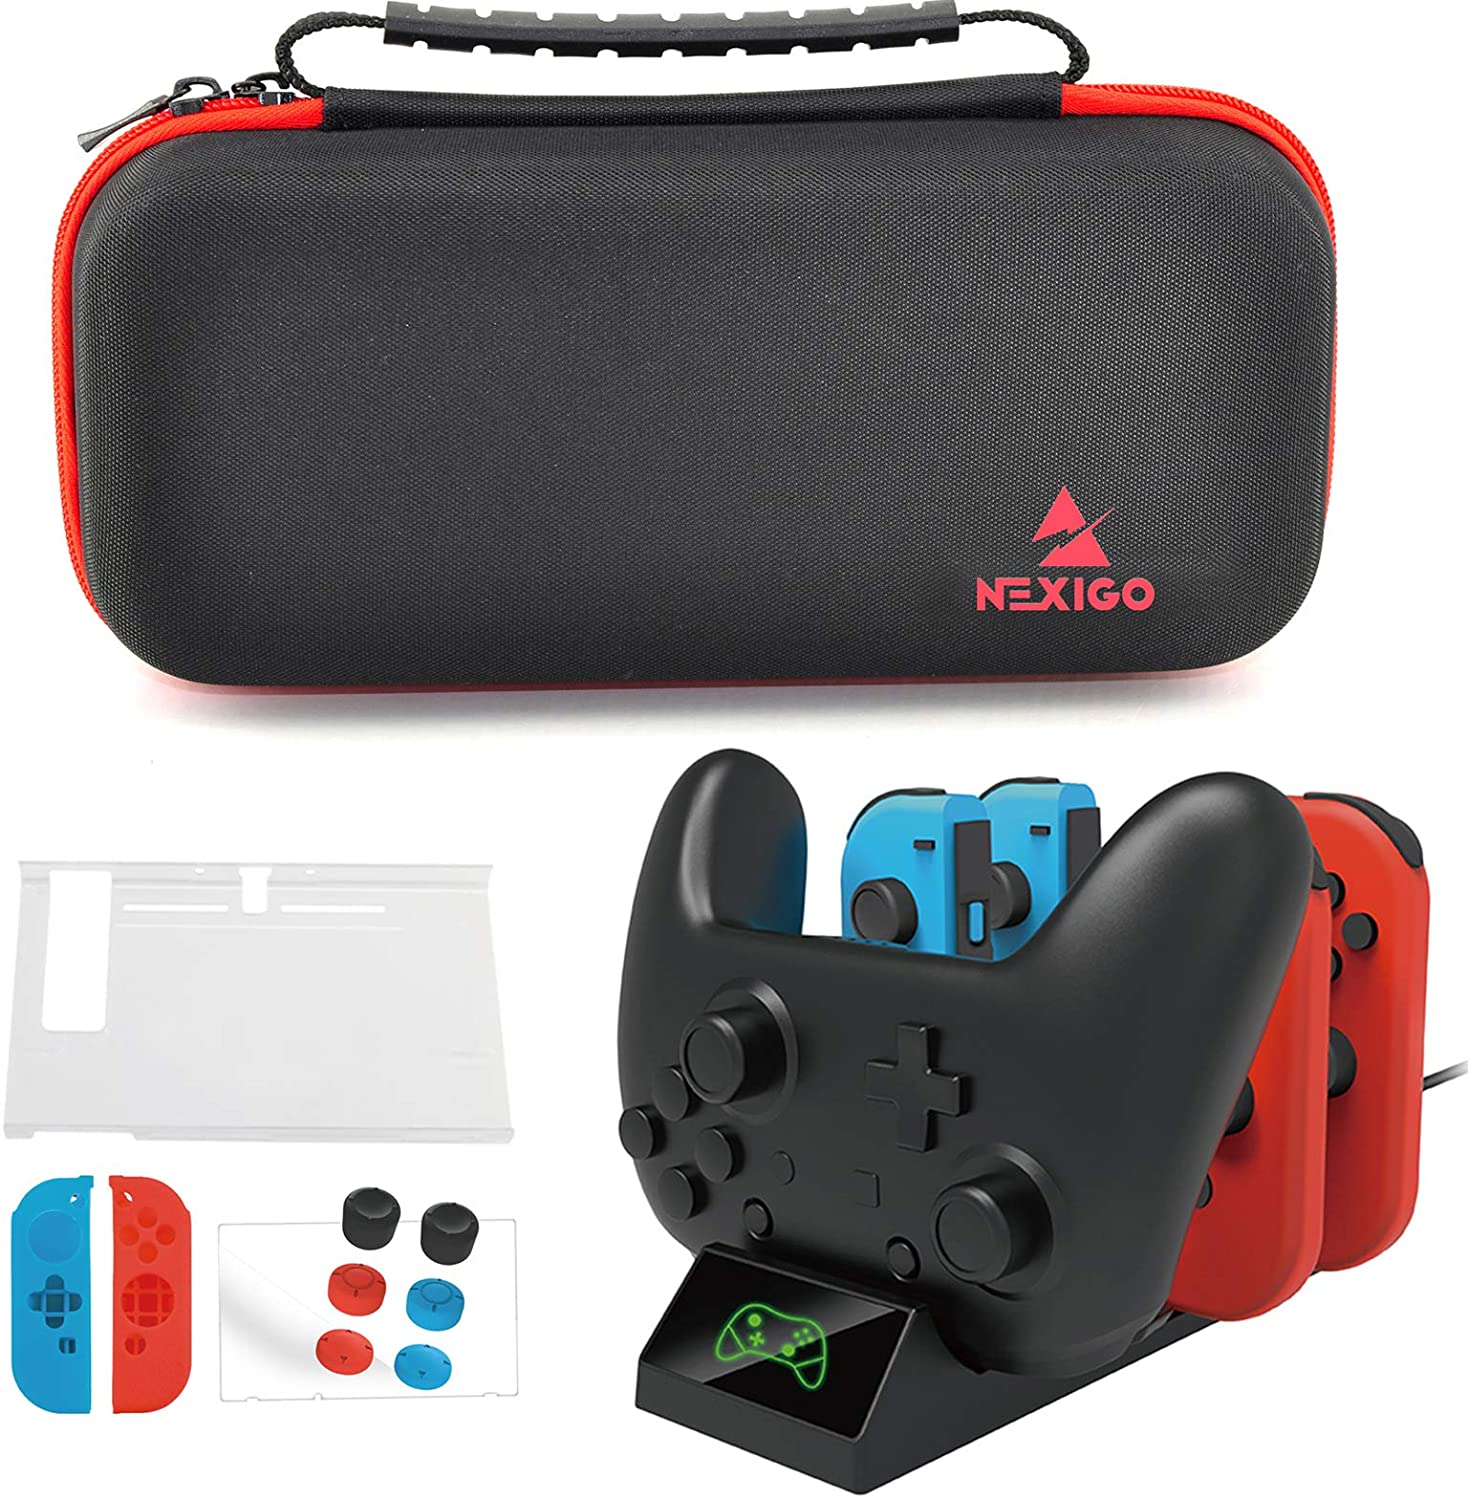 Switch dock and accessory carrying case.